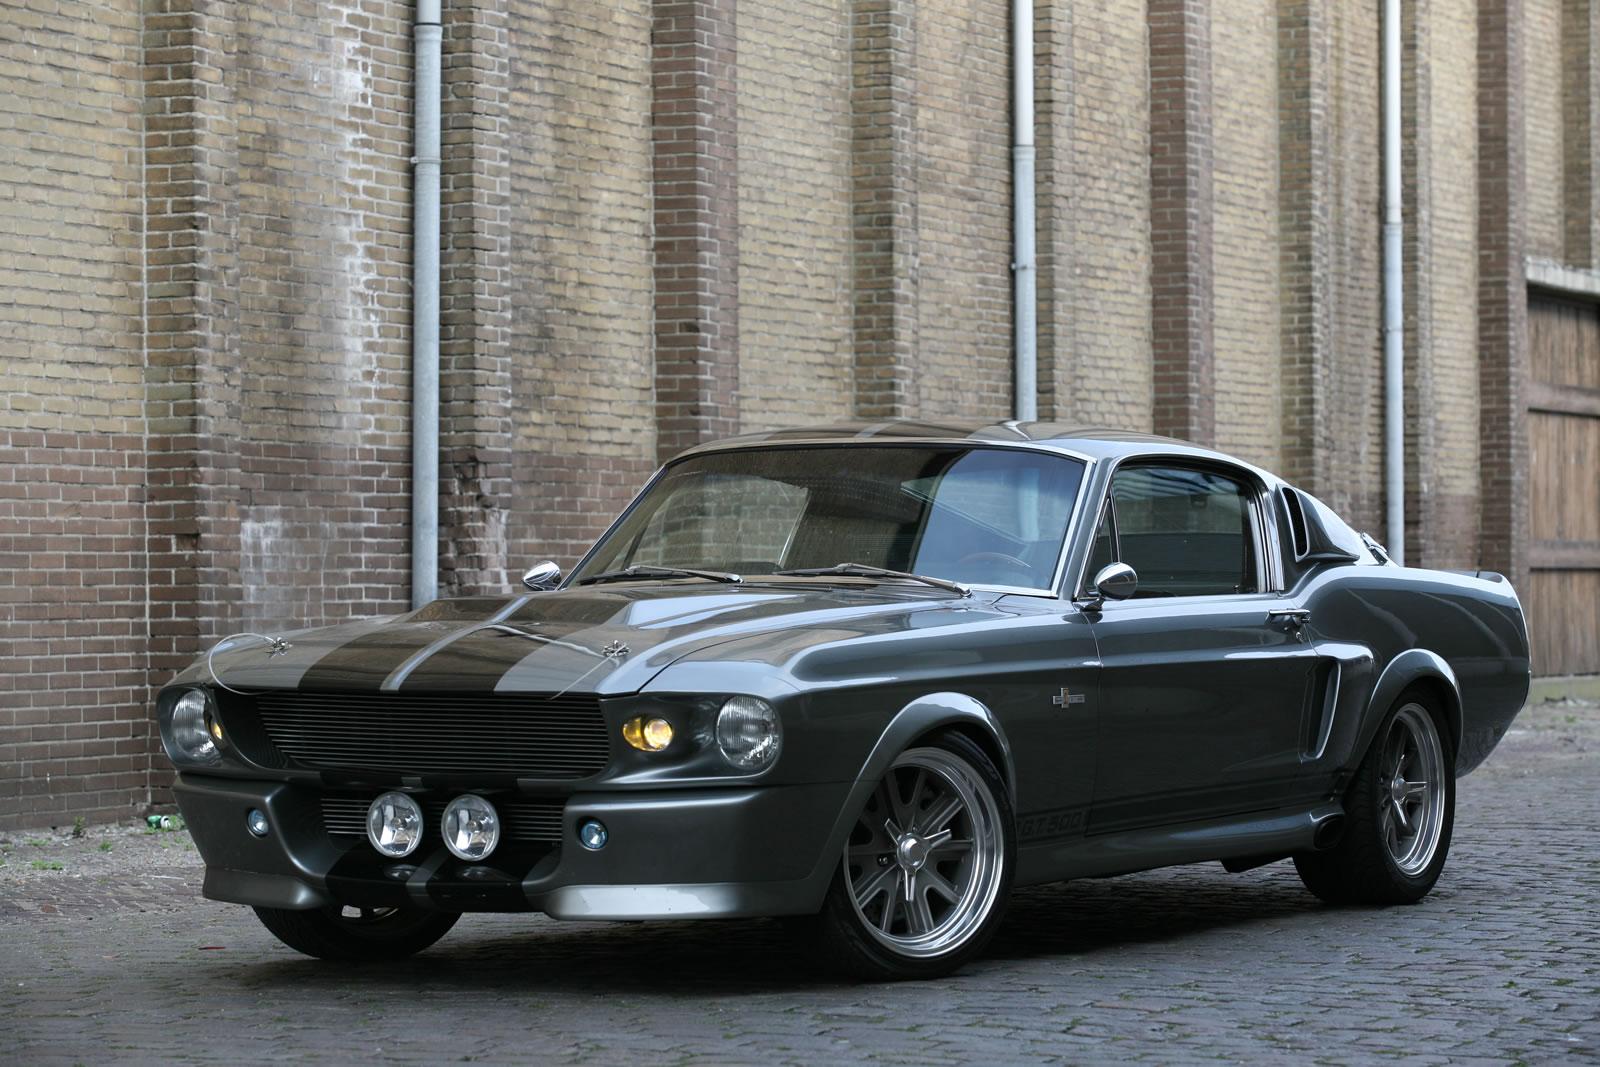 Ford Mustang 1967 Shelby Gt500 Wallpaper